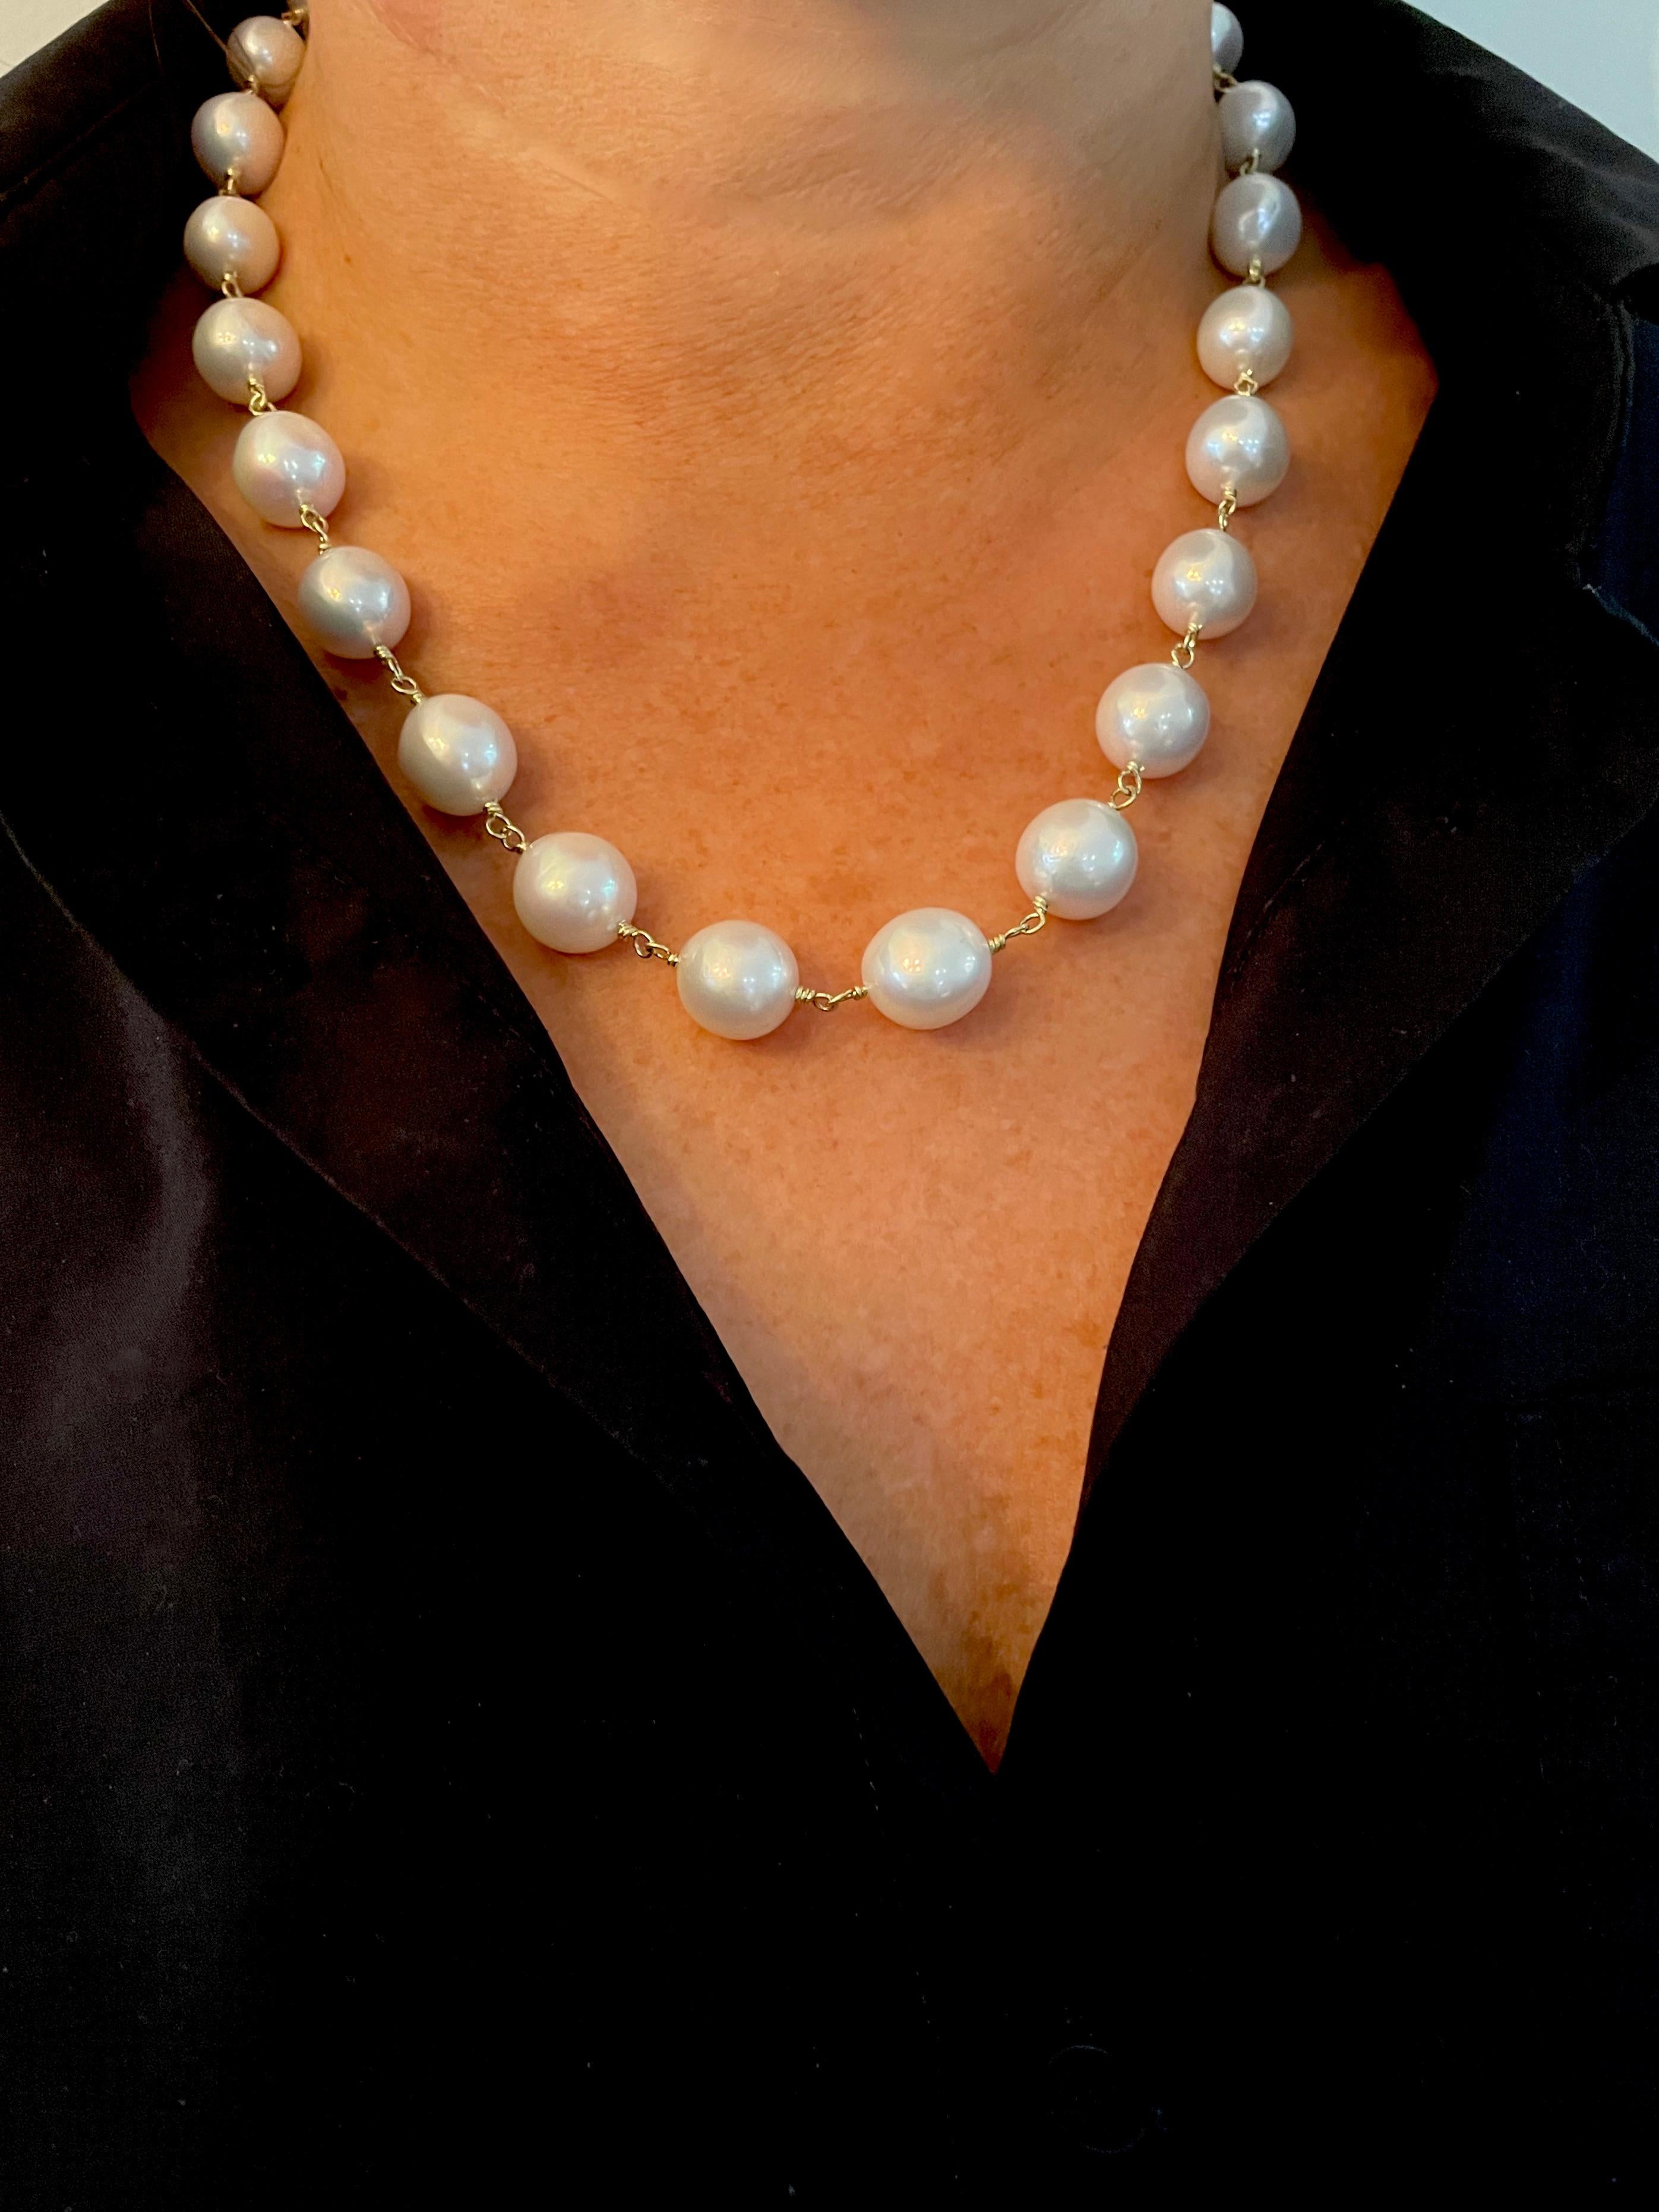 Meticulously finished in 18k gold*, lustrous freshwater pearls are hand-wrapped to create a timeless pearl chain that has adorned fashionable women throughout time. With oversized, slightly off-round pearls and a large handmade clasp, the look is